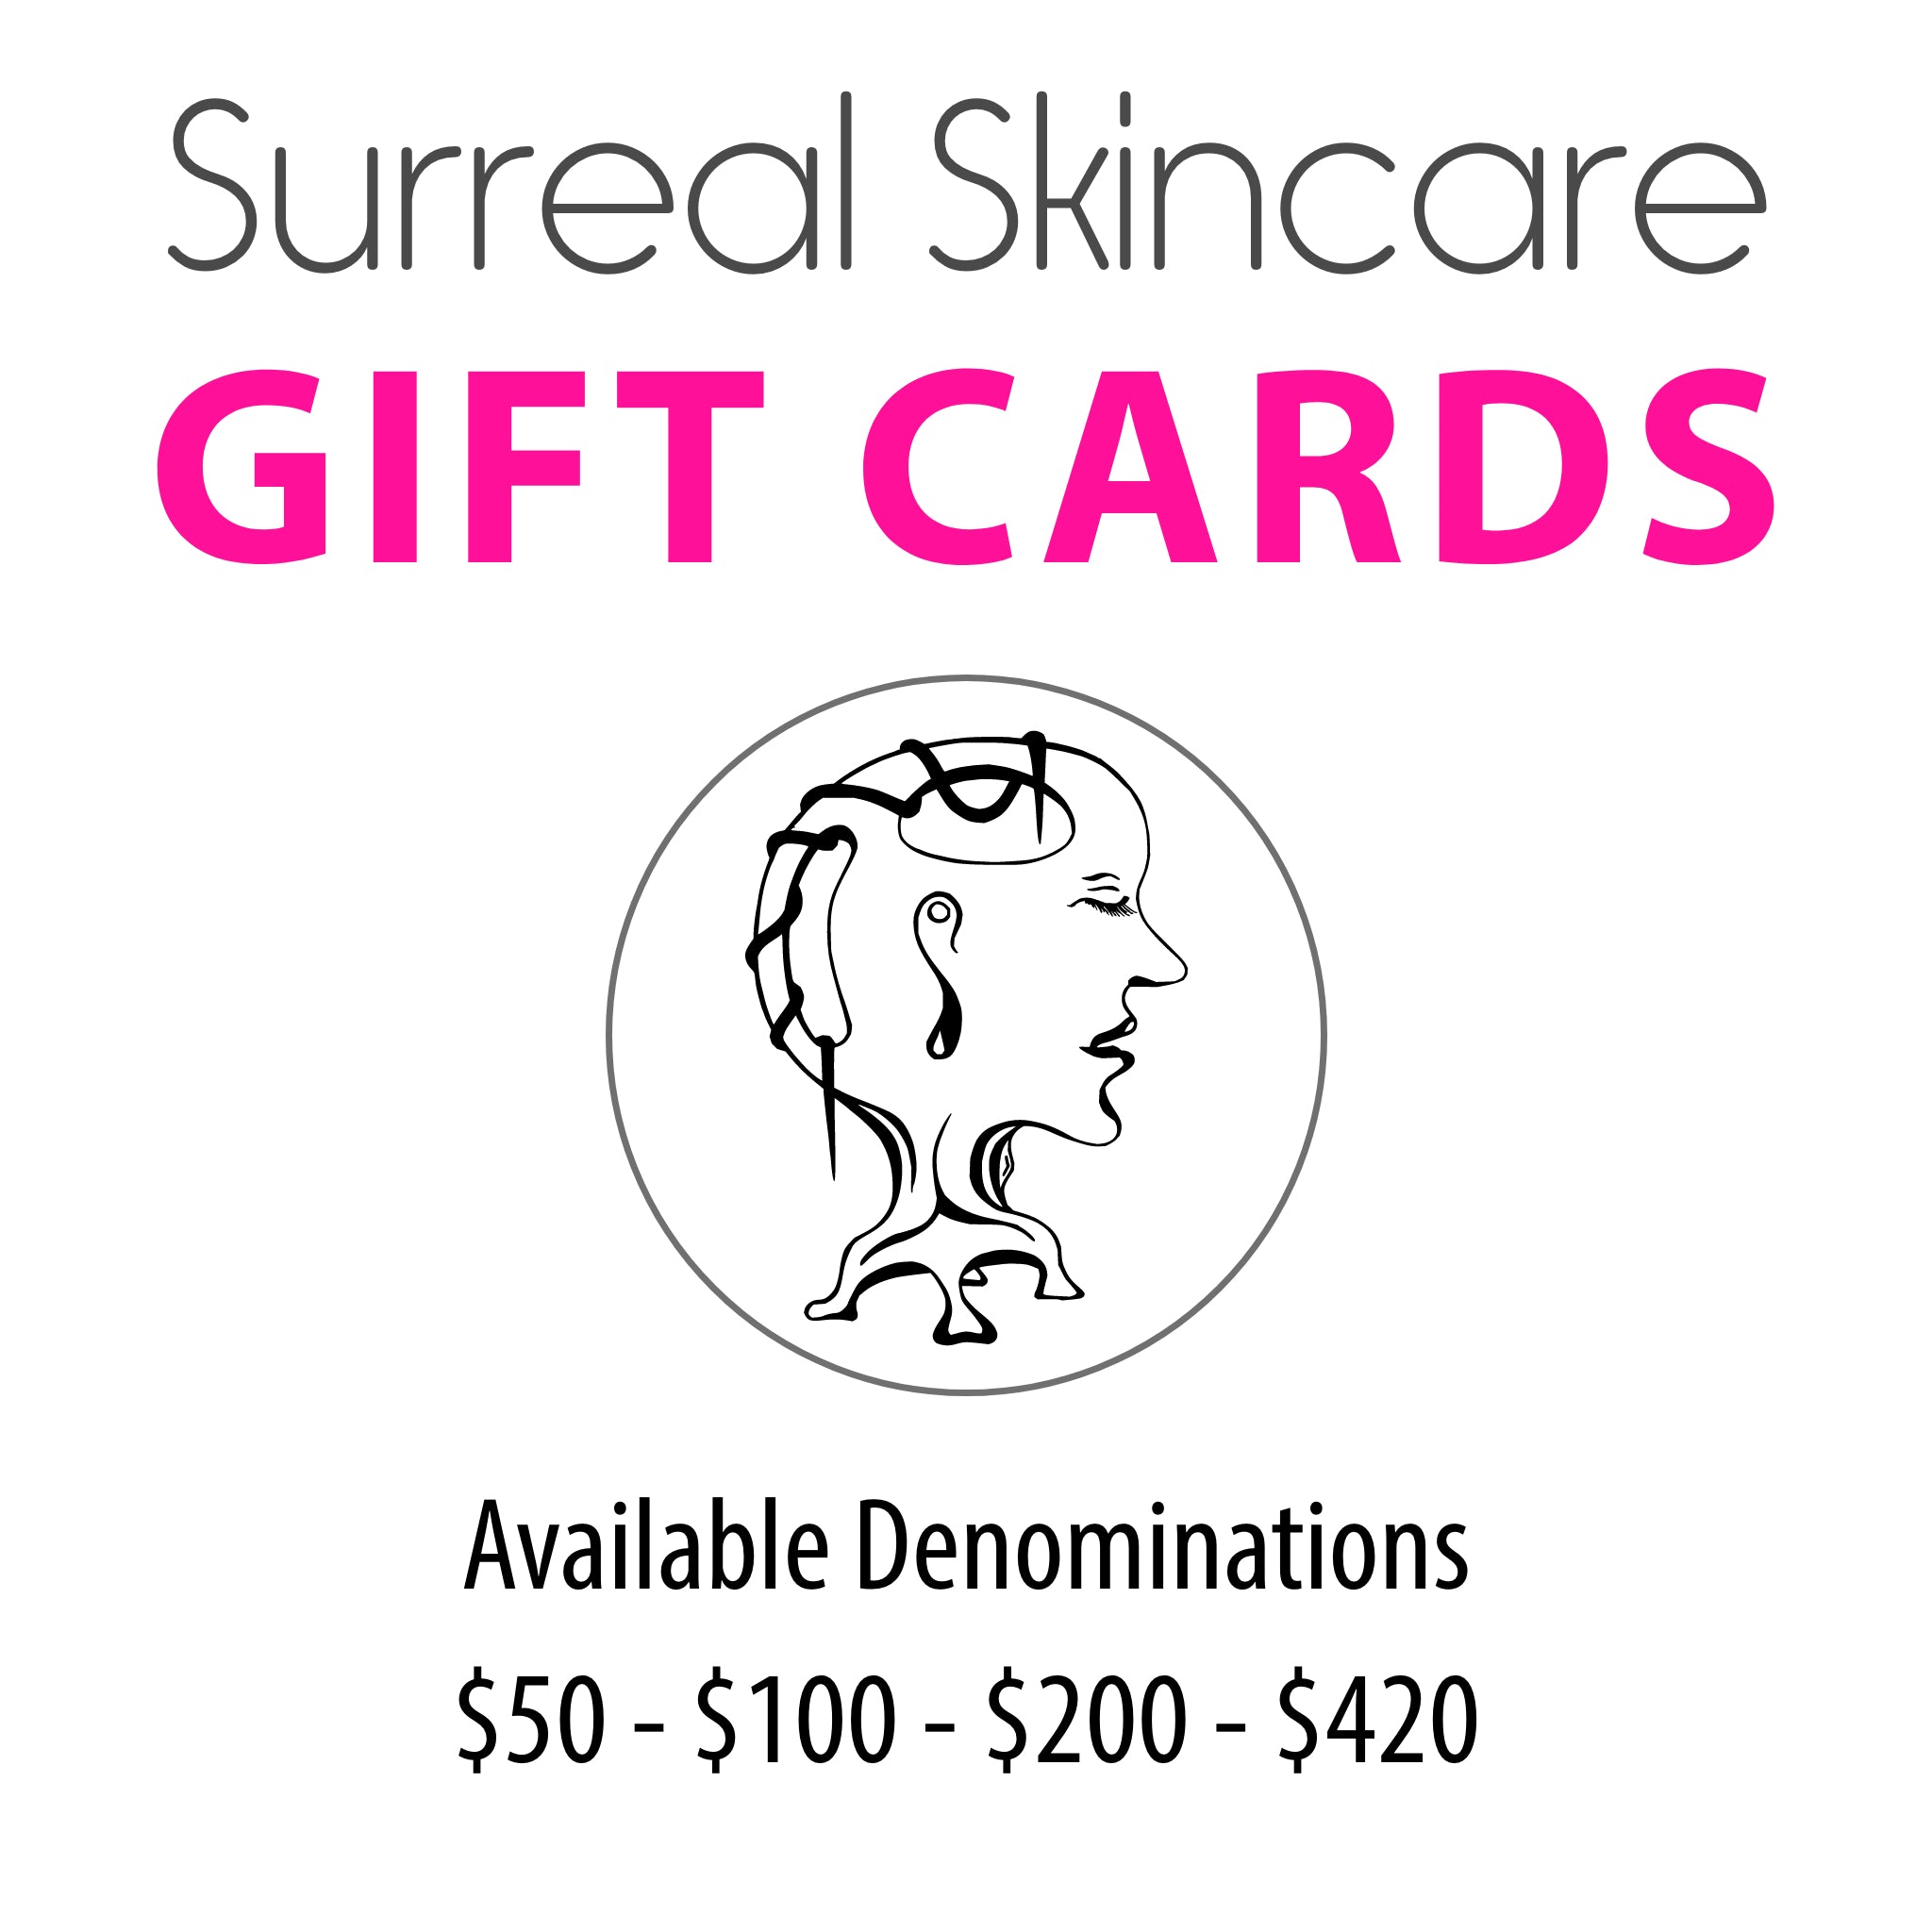 SURREAL GIFT CARDS